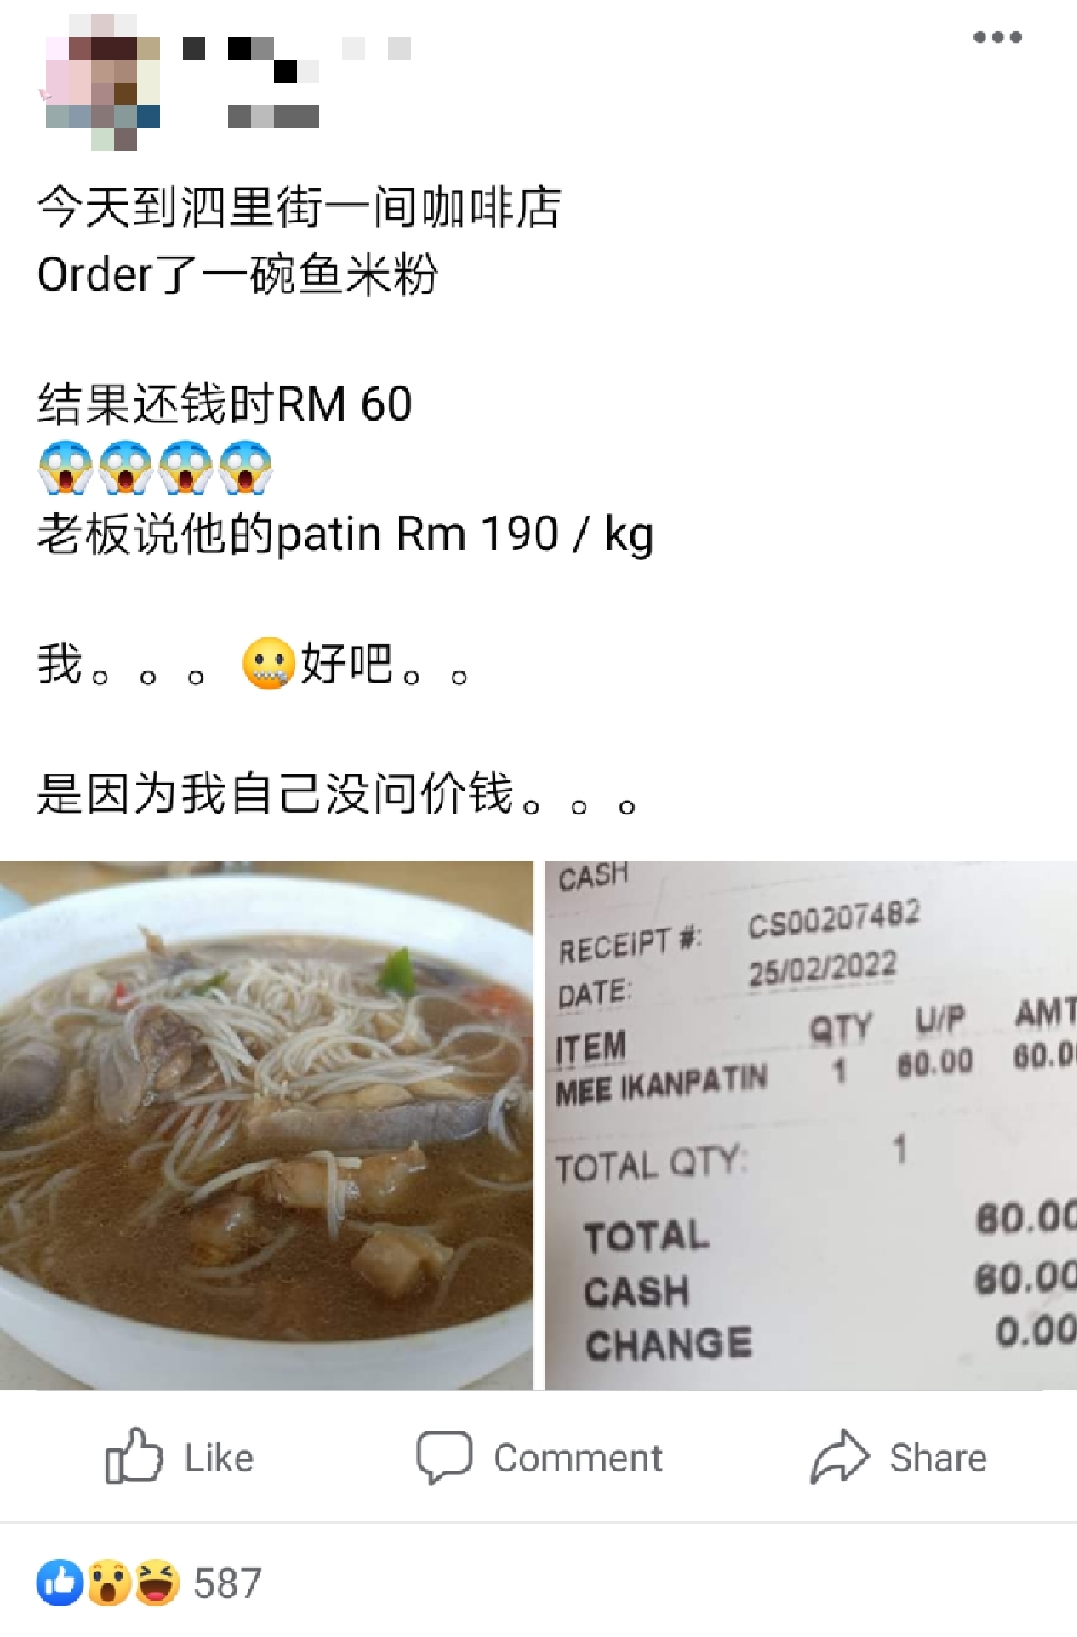 Customer shocked over being charged rm60 for ikan patin noodles